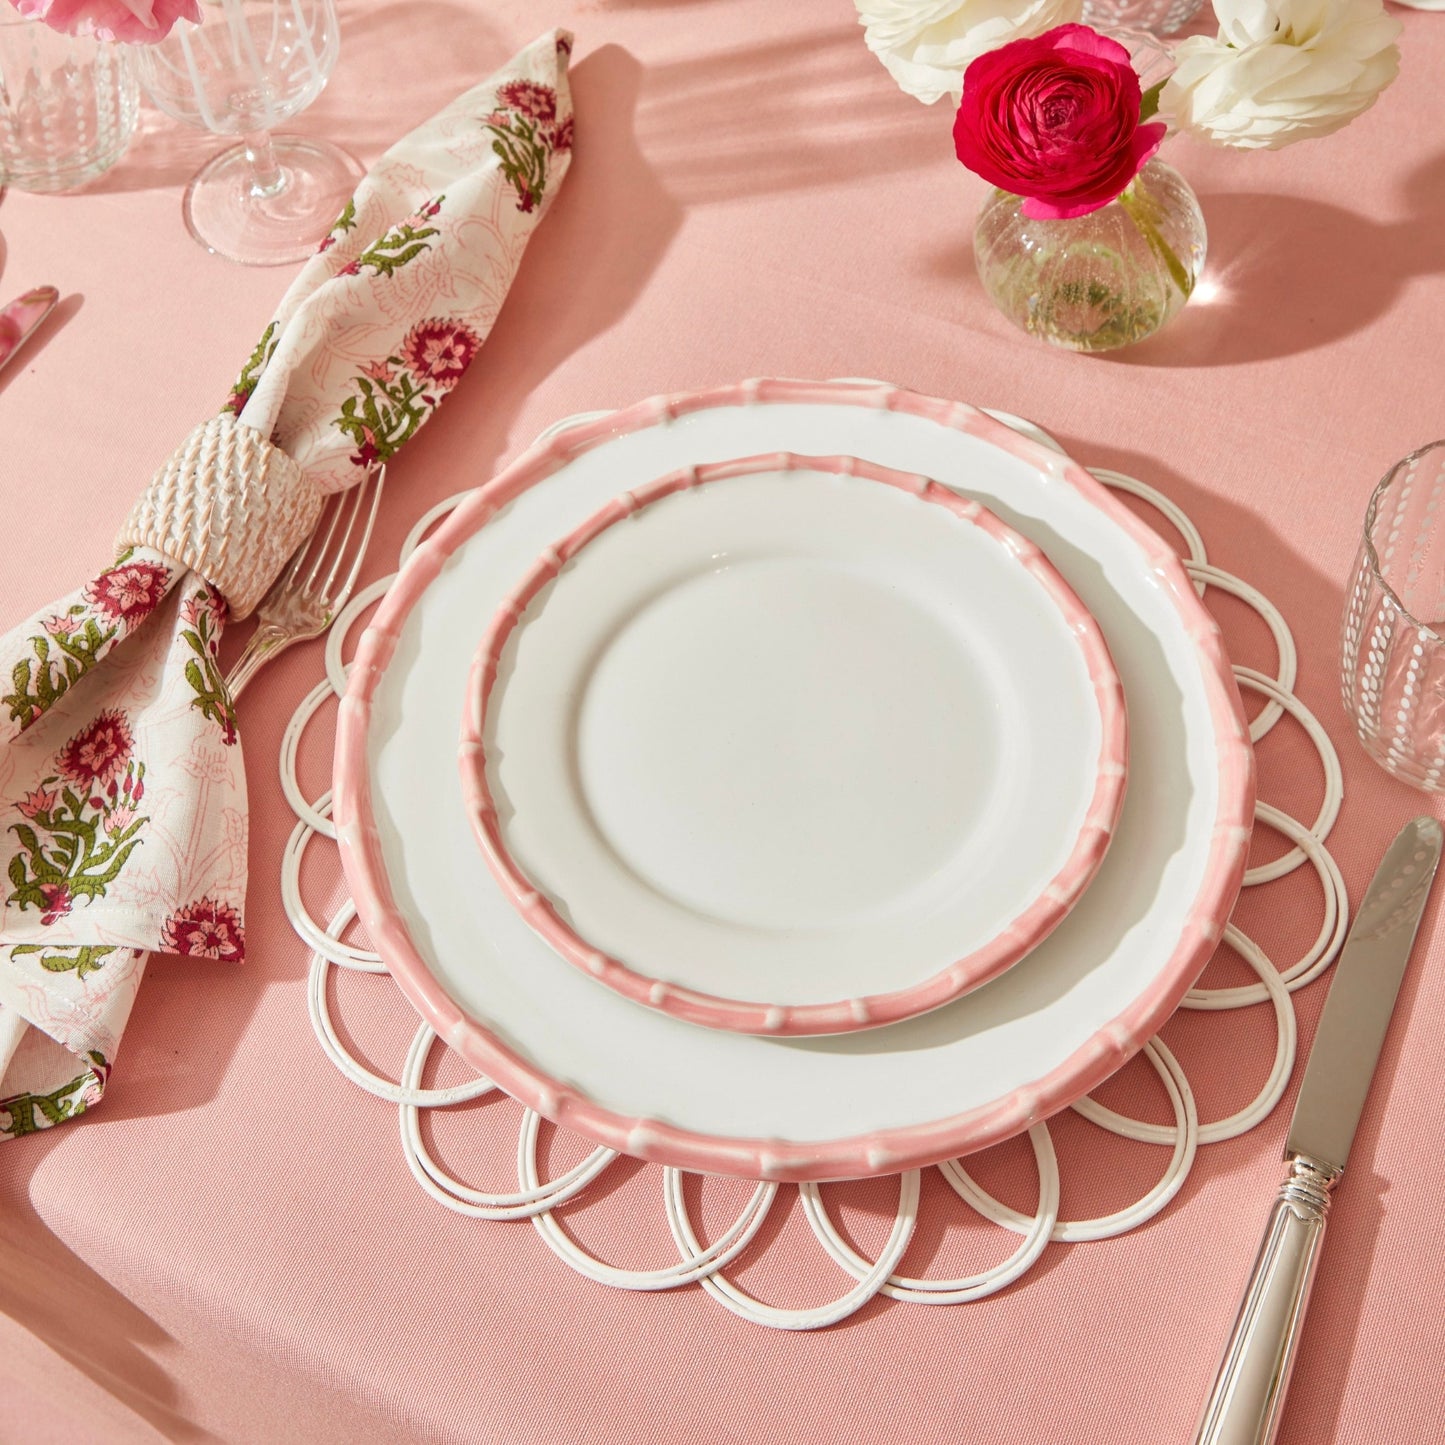 Large Pink Bamboo Dinner Plate  (1 piece)